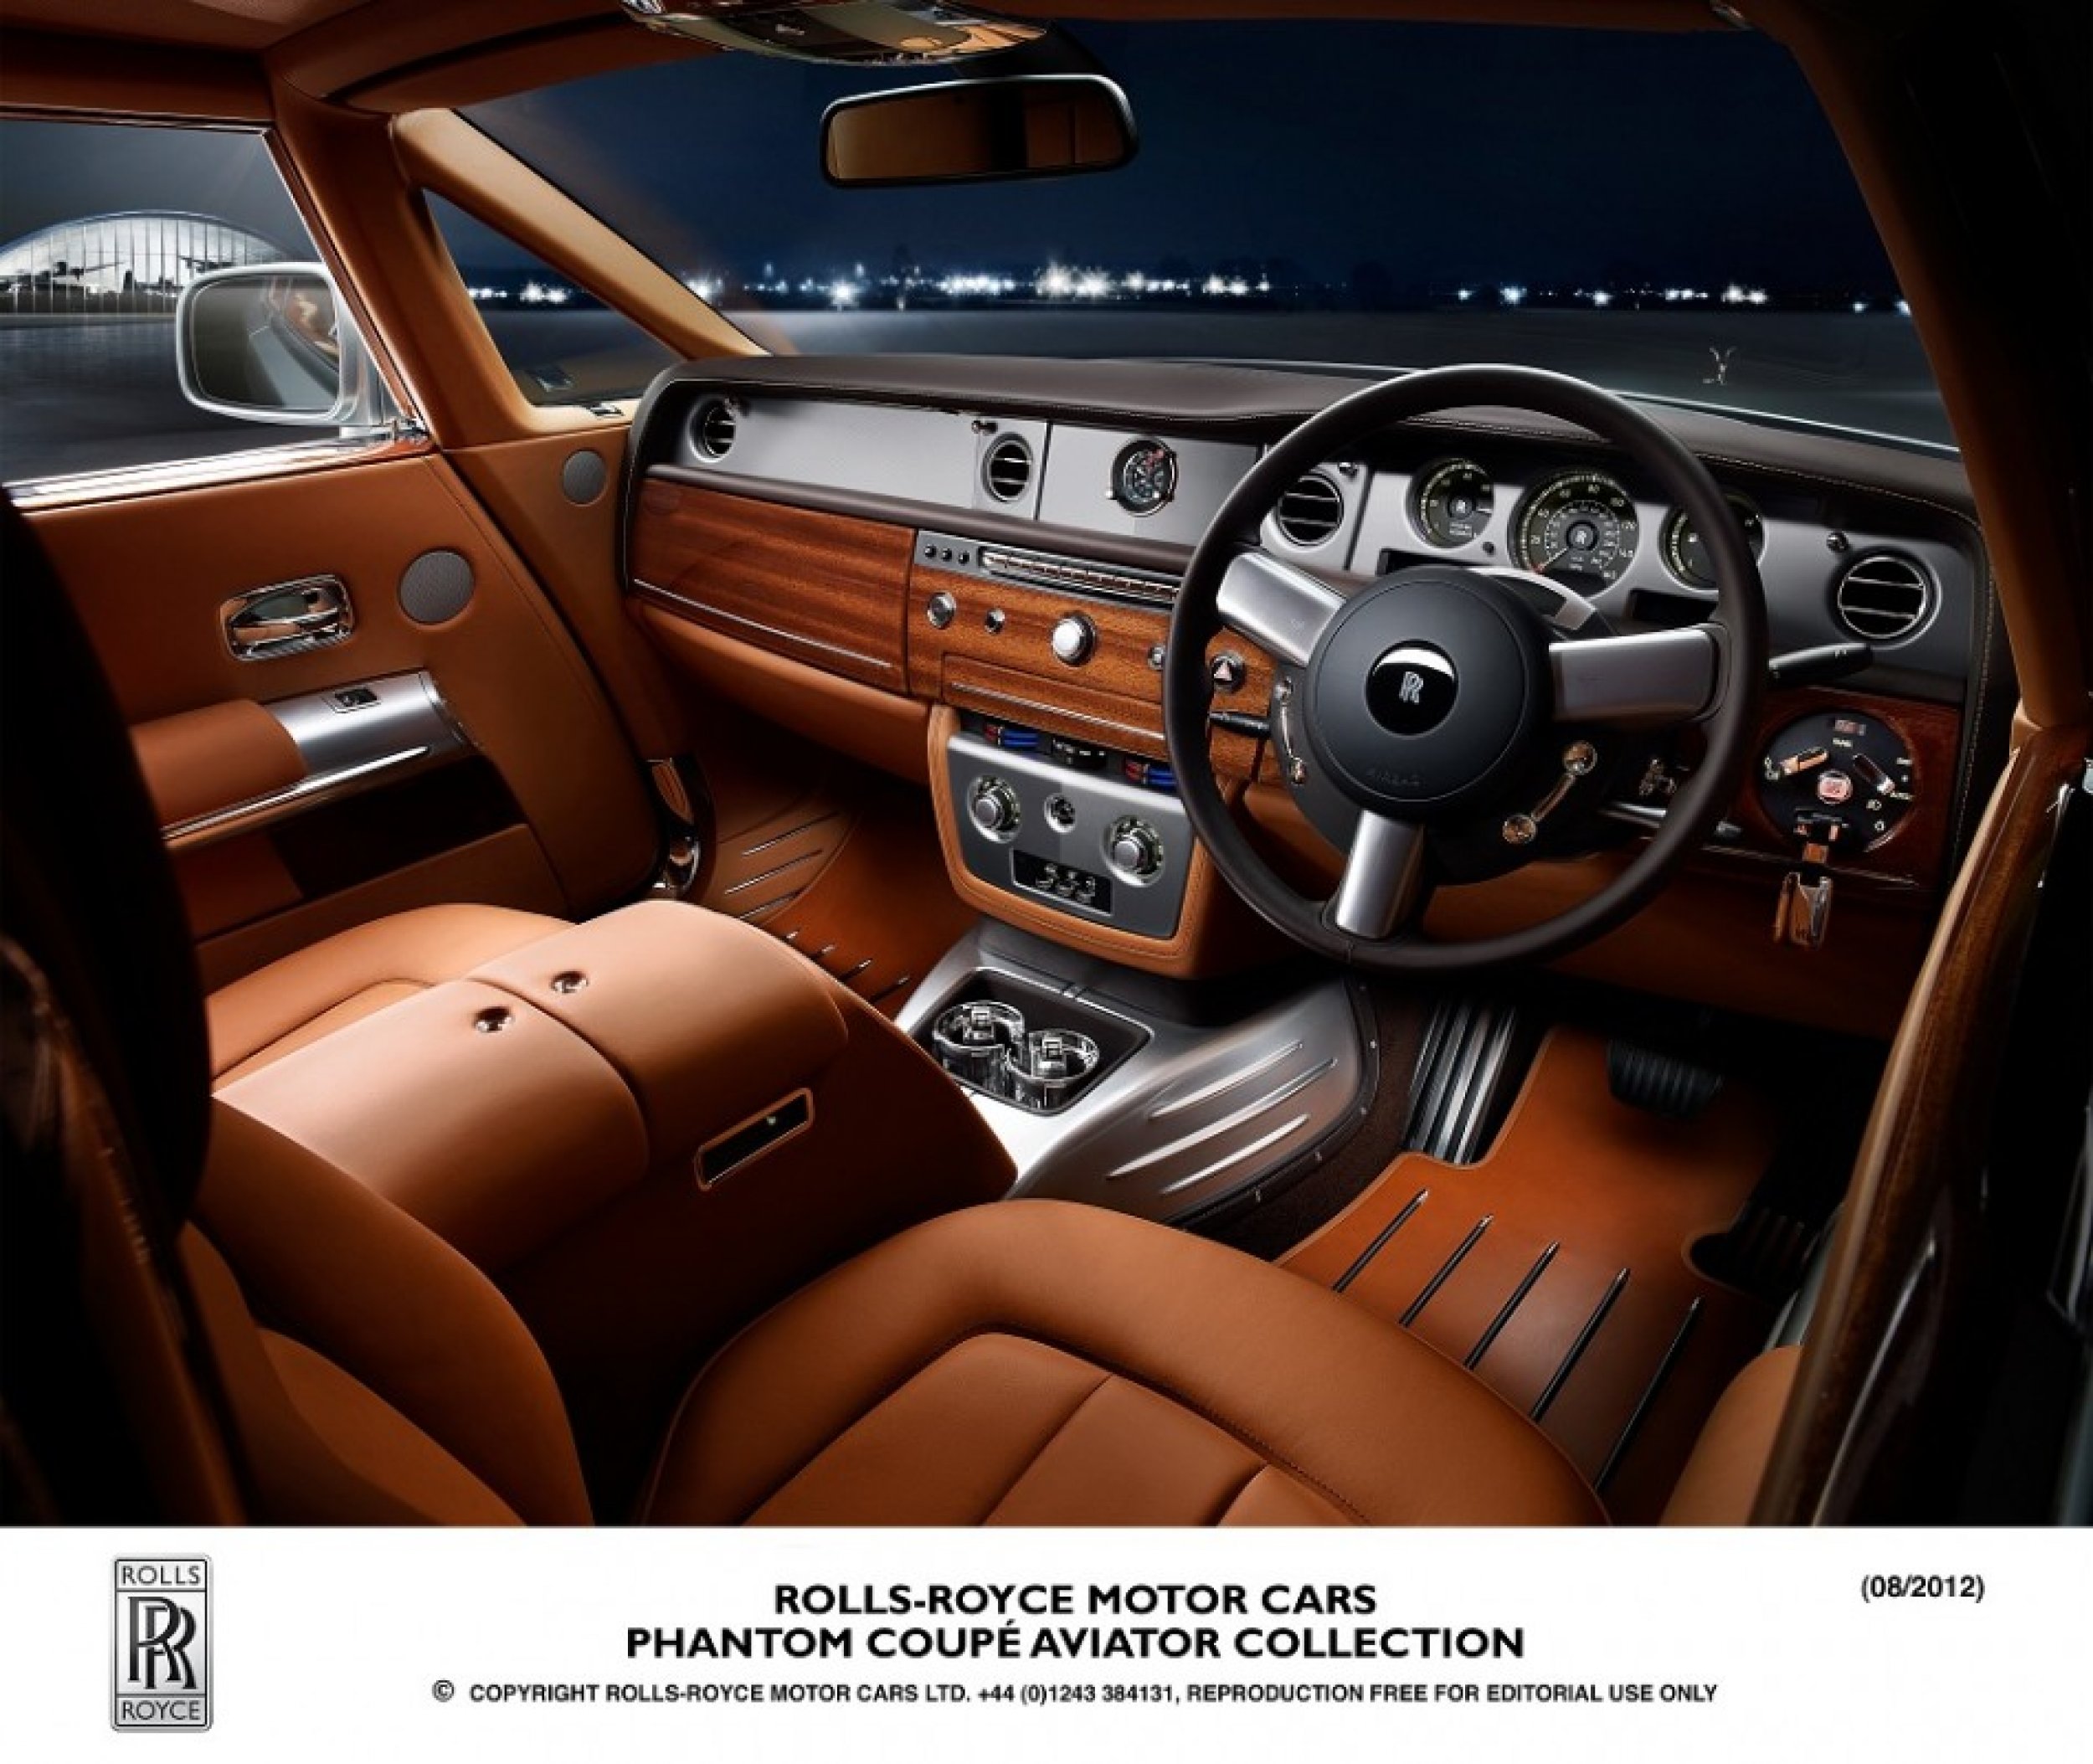 The steering-wheel and dials in the new Rolls-Royce Phantom Coupe Aviator.